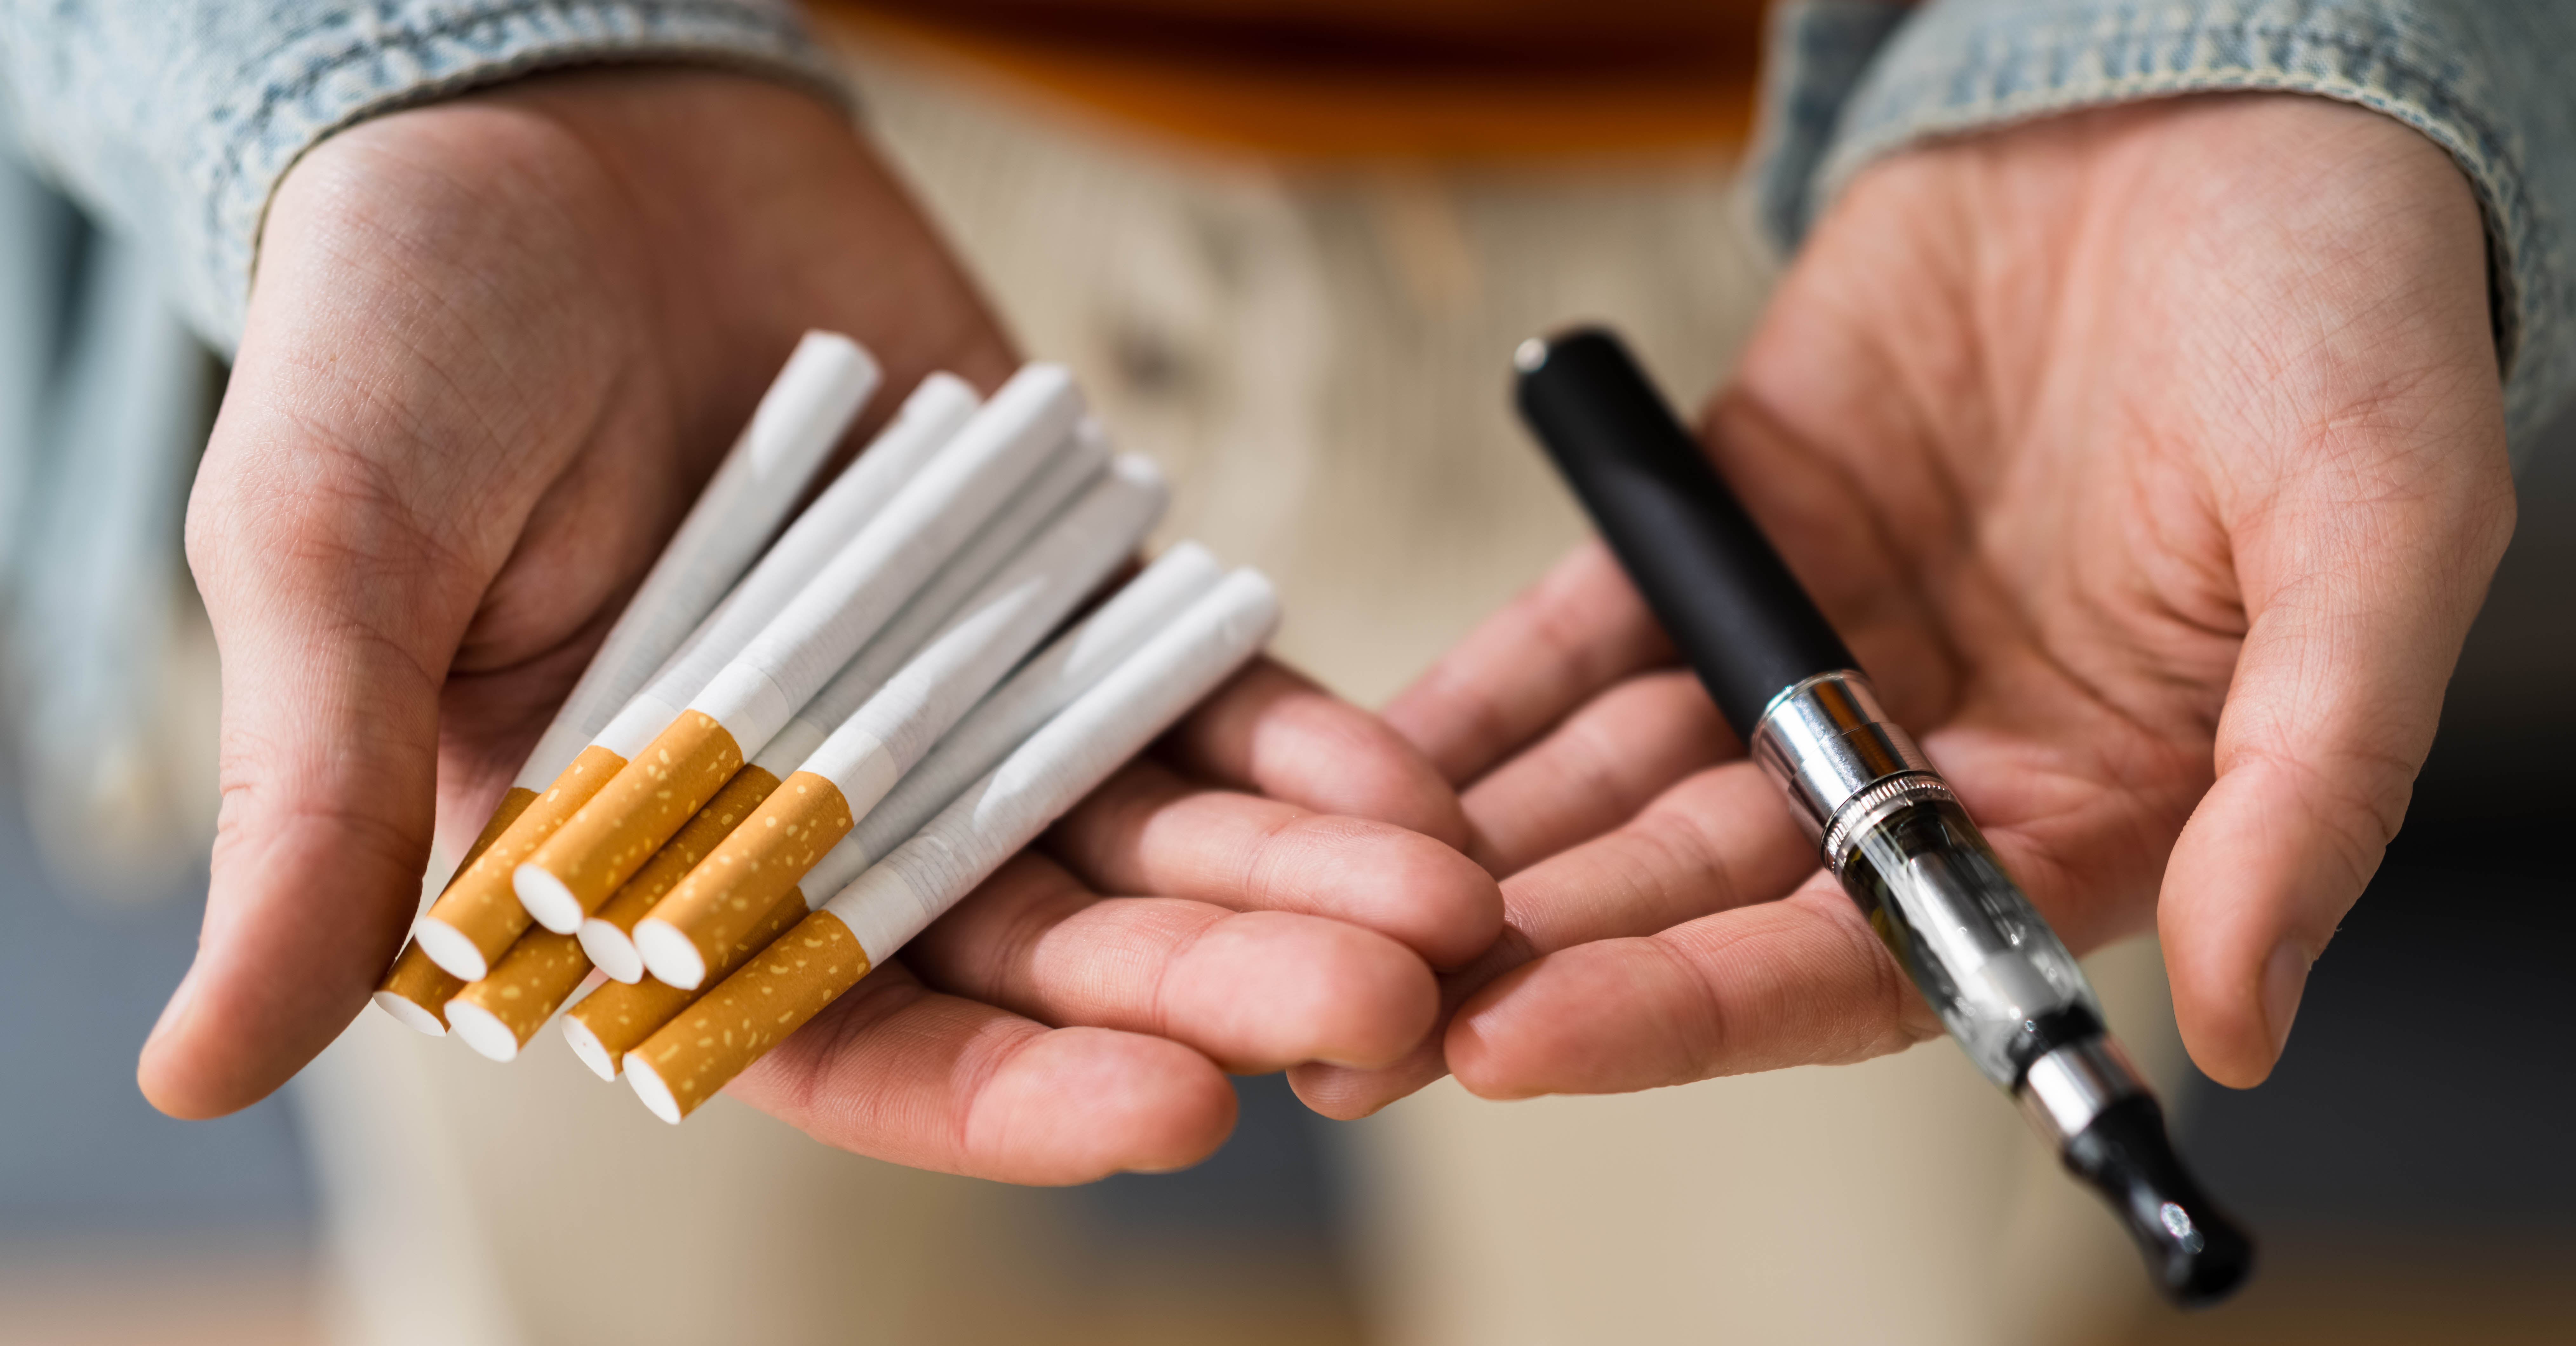 A person holding cigarettes in one hand and e-cigarettes in the other.